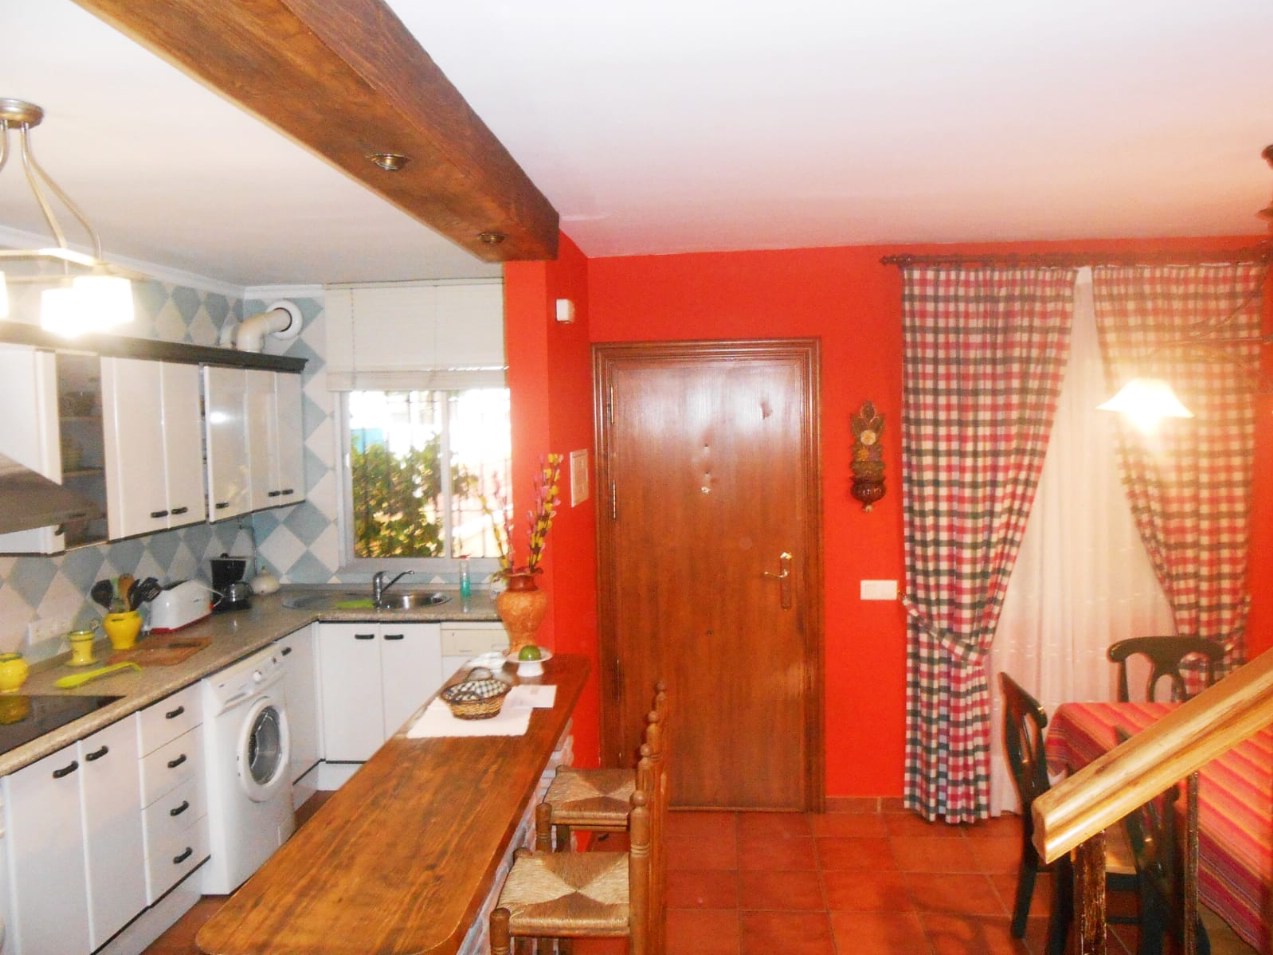 Townhouse for sale in Nerja 9